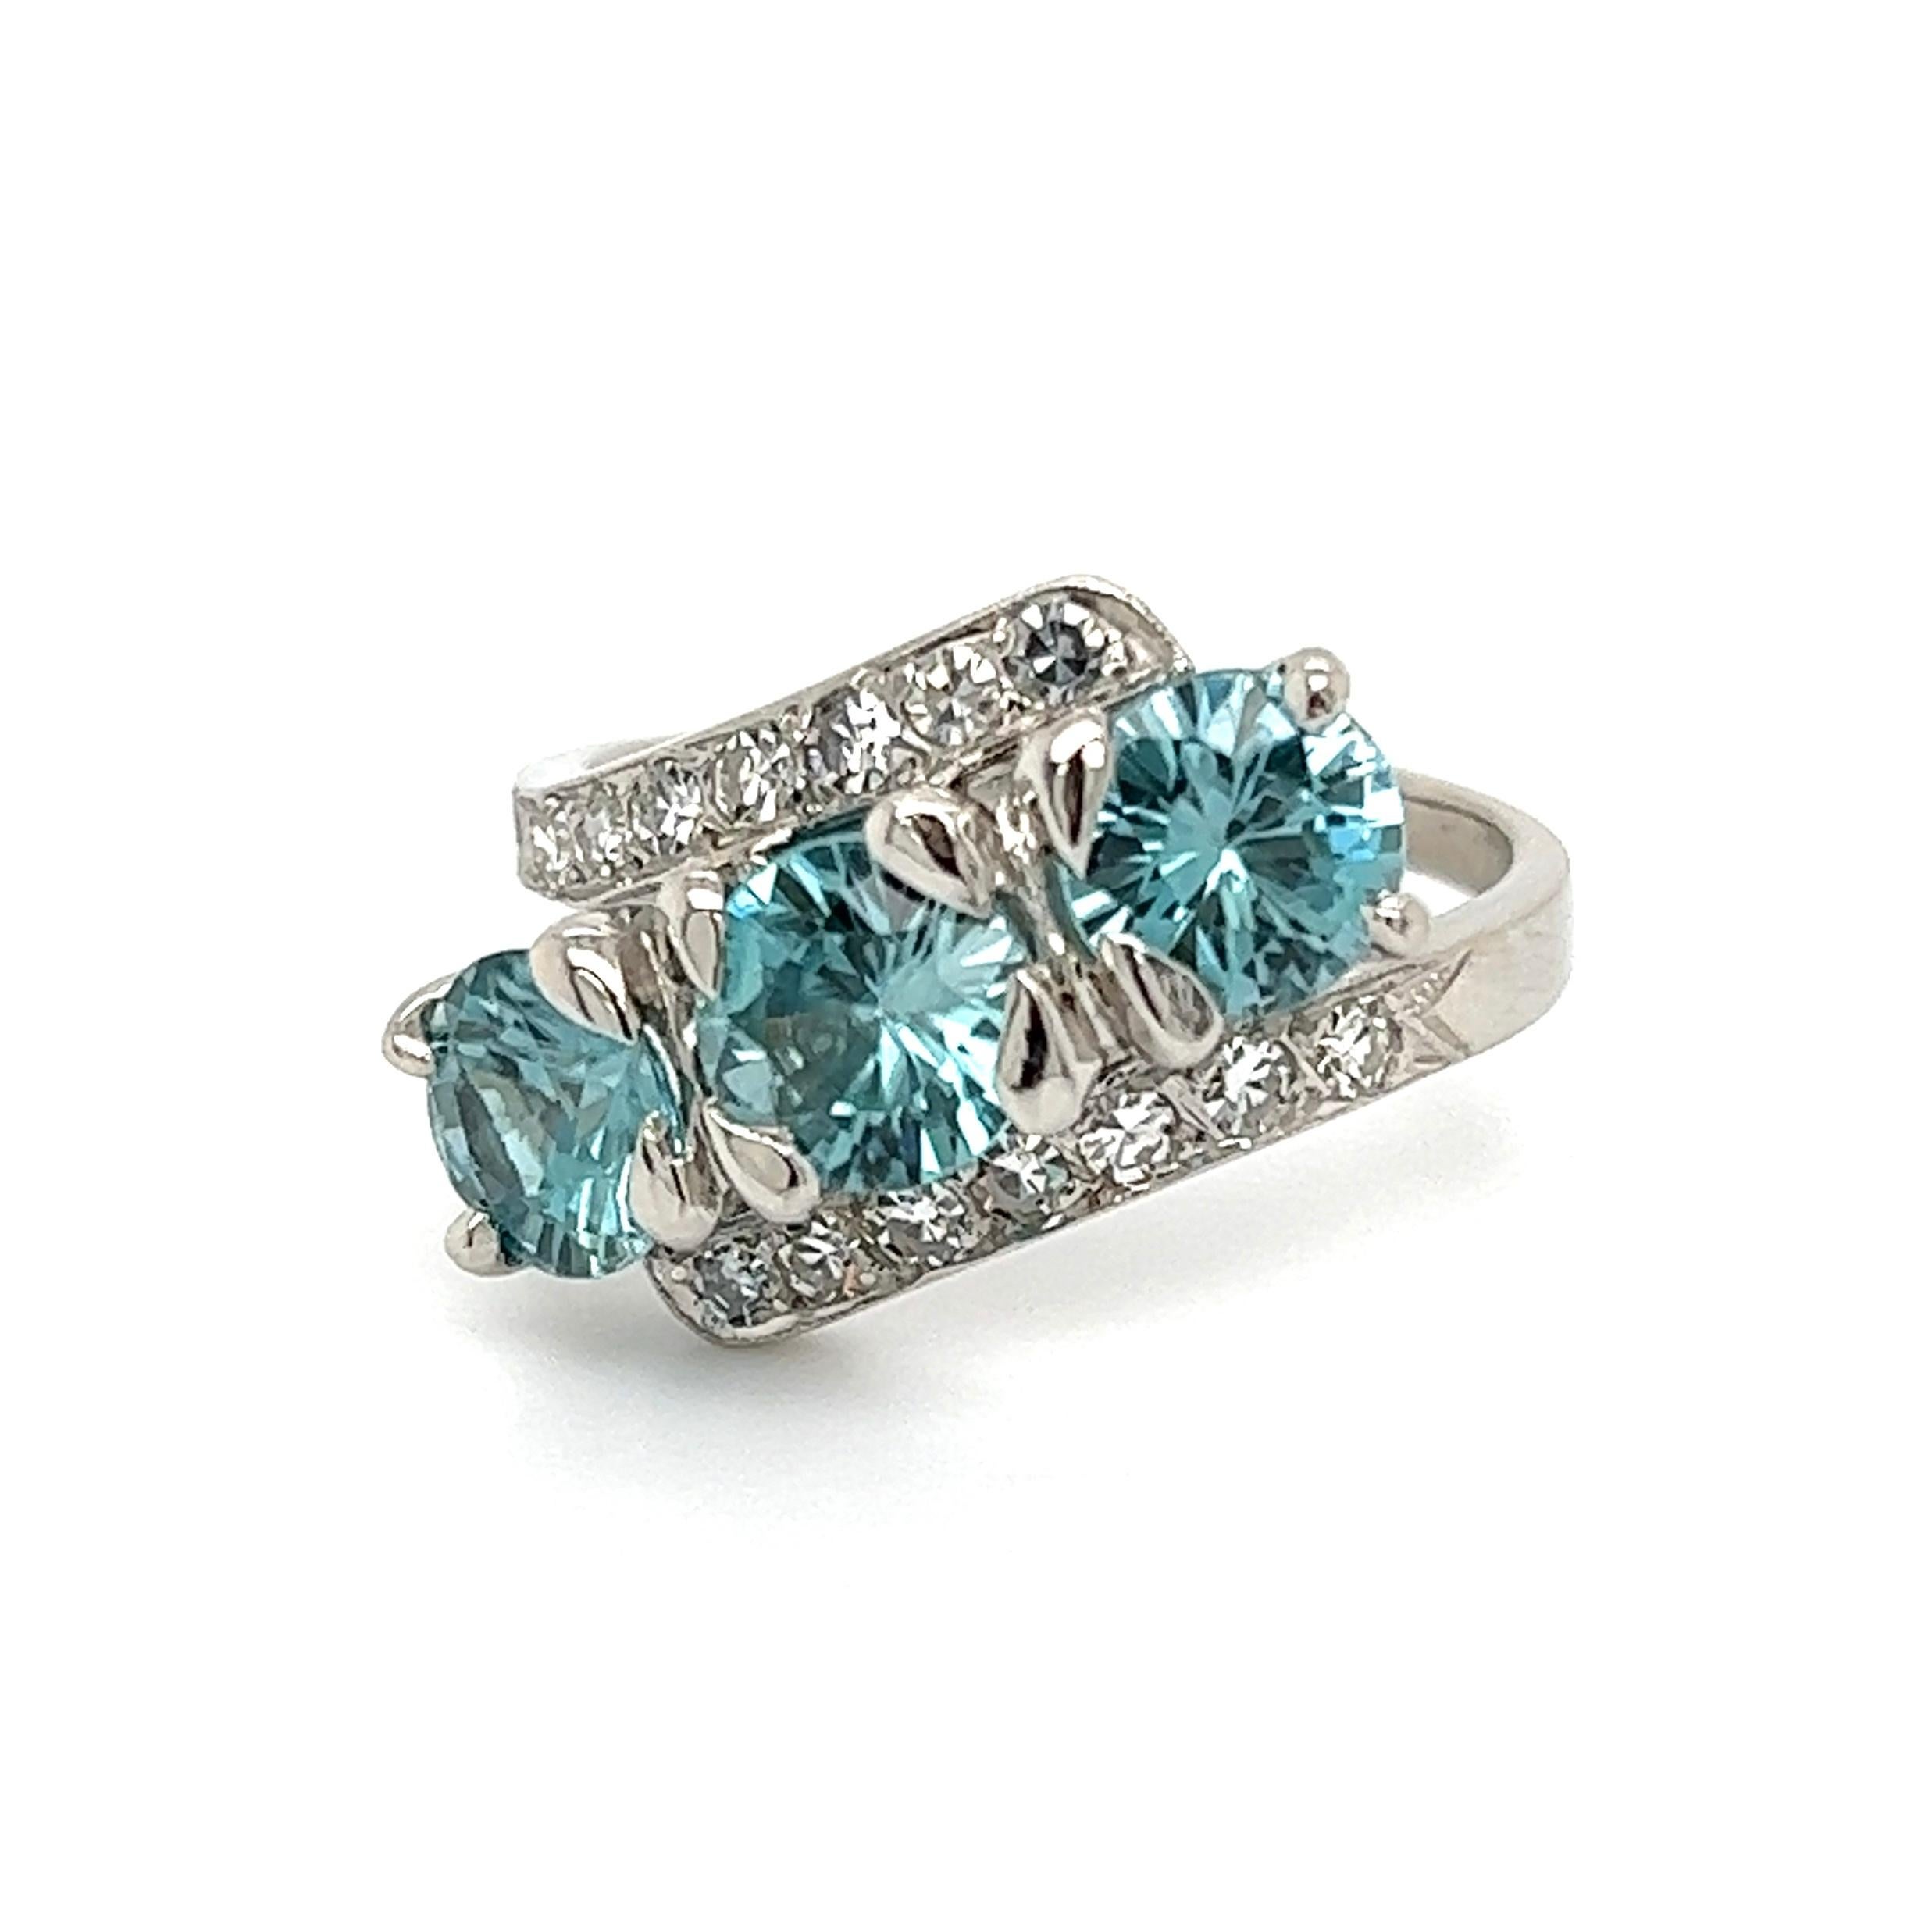 Simply Beautiful! Finely crafted Three Stone Blue Zircon and Diamond Ring. Hand set 3 Blue Zircons weighing approx. 4.55tcw, enhanced with Diamonds, weighing approx. 0.50tcw. Ring size: 6.5, we offer ring re-sizing. Dimensions 0.93” l x 0.76” w x